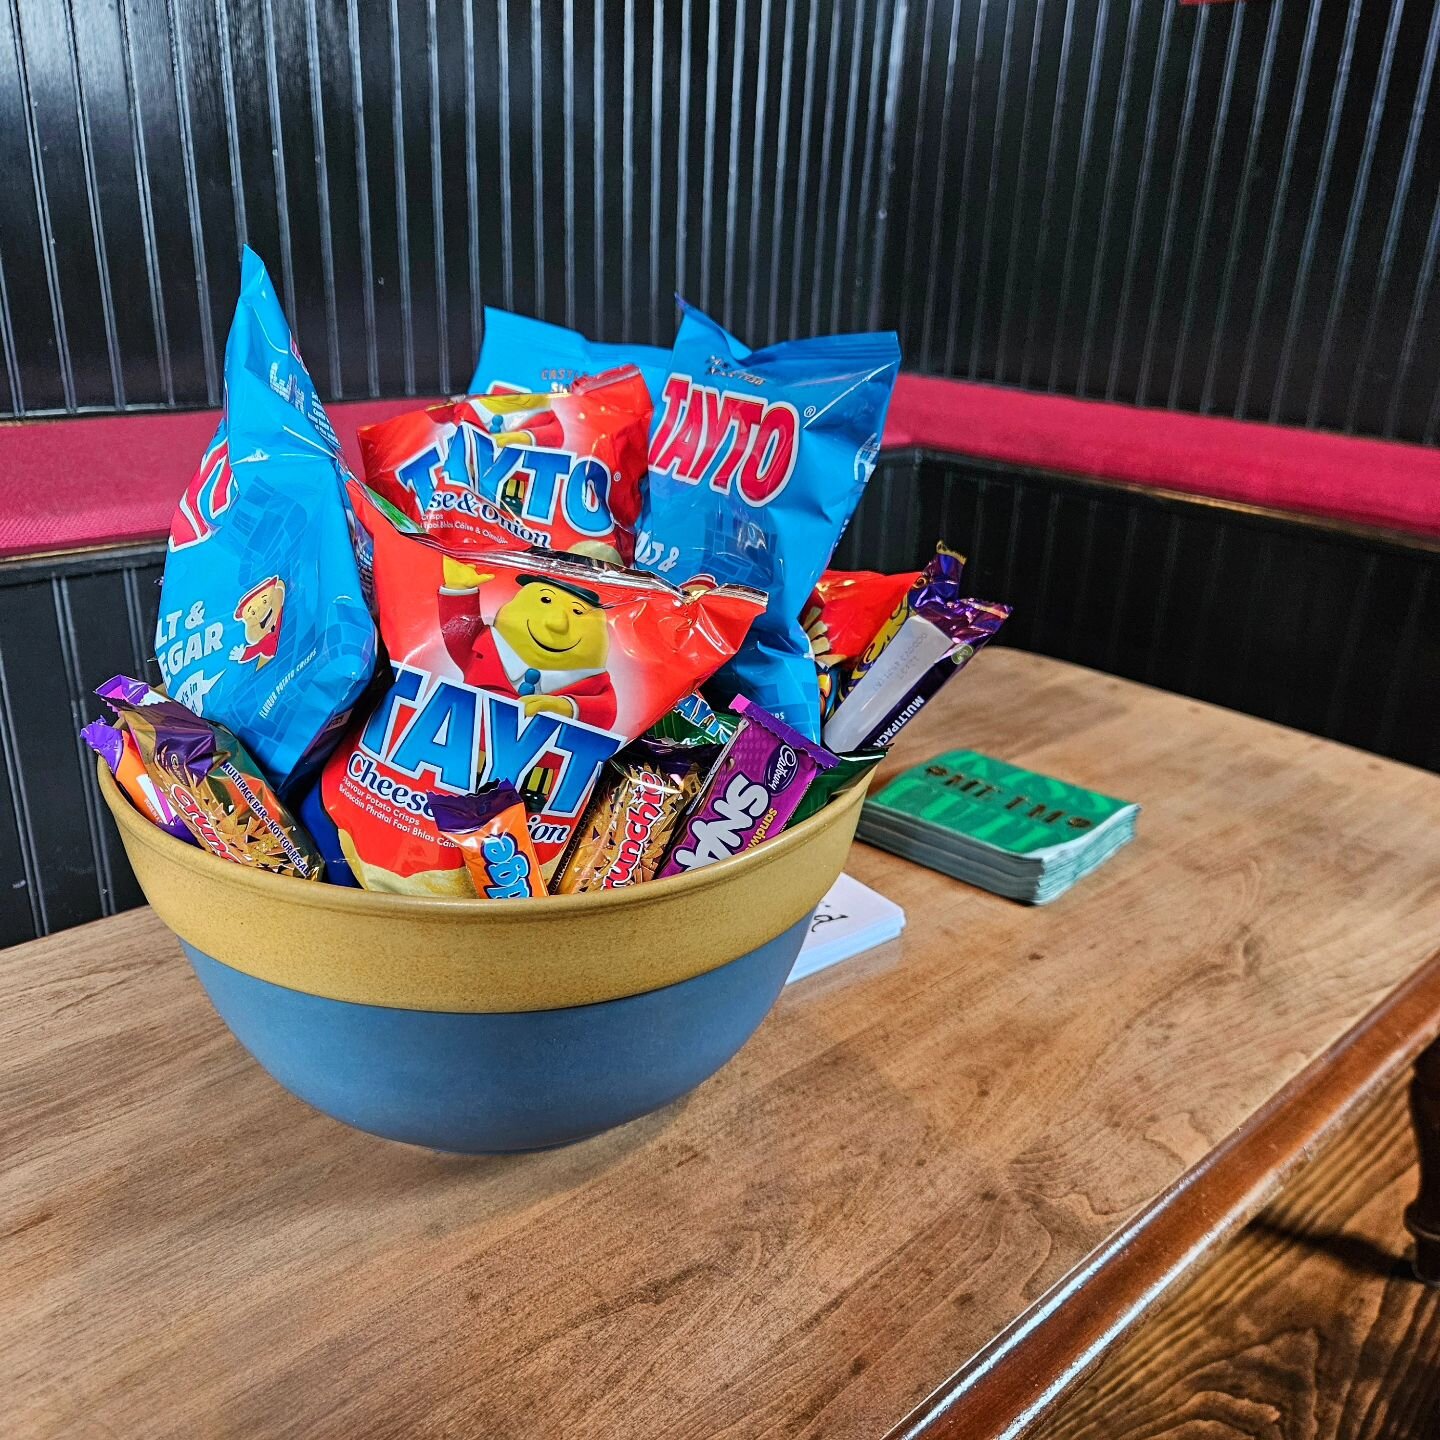 The only thing as important as a well stocked bar is a well stocked snack bowl. 😍🤤🇮🇪
.
#wanderingdruid #tinyhouse #tinypub #barrental #mobilebar #ireland #newengland #irishpub #guinness #bostonfoodies #massachusetts #boston #whiskey #irishabroad 